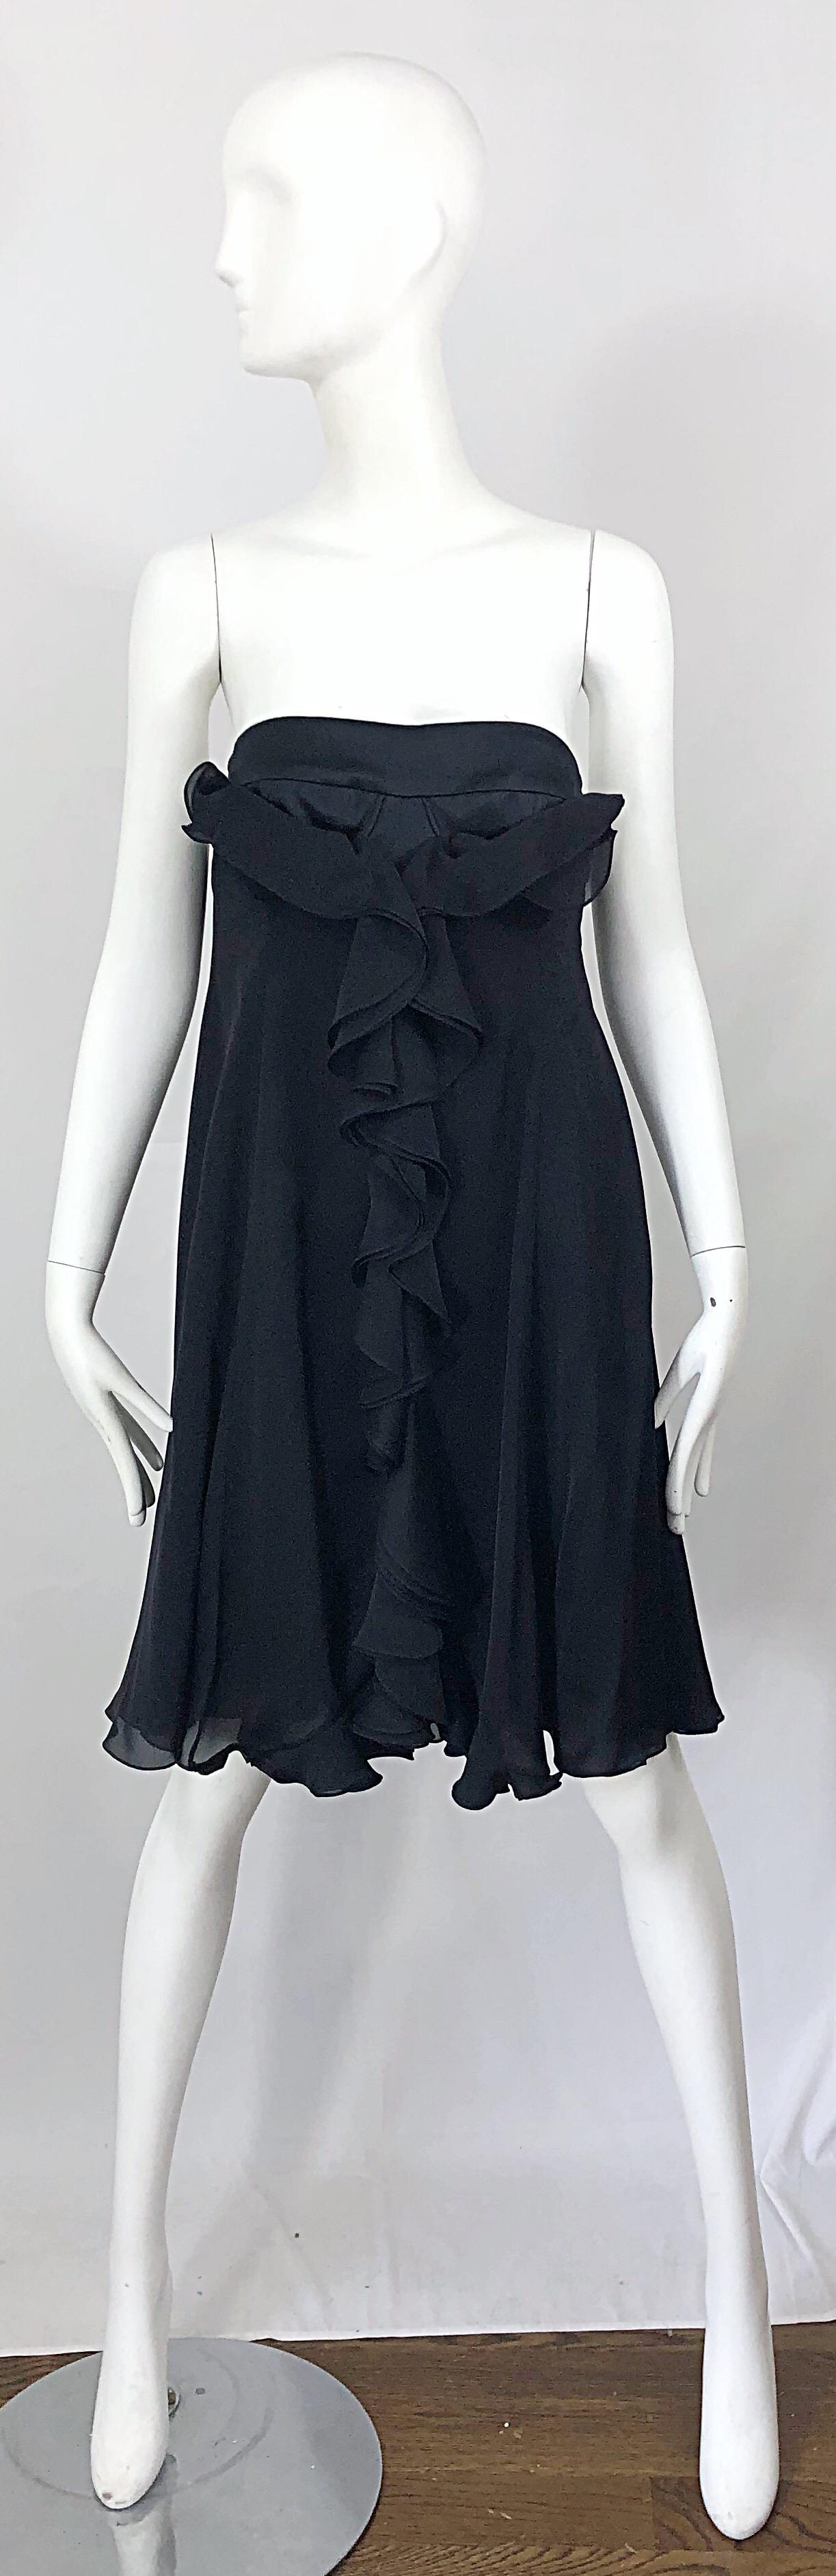 Chic brand new with tags YVES SAINT LAURENT Spring 2008 black silk strapless dress! Features intricate interior corset boning that holds everything in place. Hidden zipper up the side with hook-and-eye closure. Additional lace closures at back with